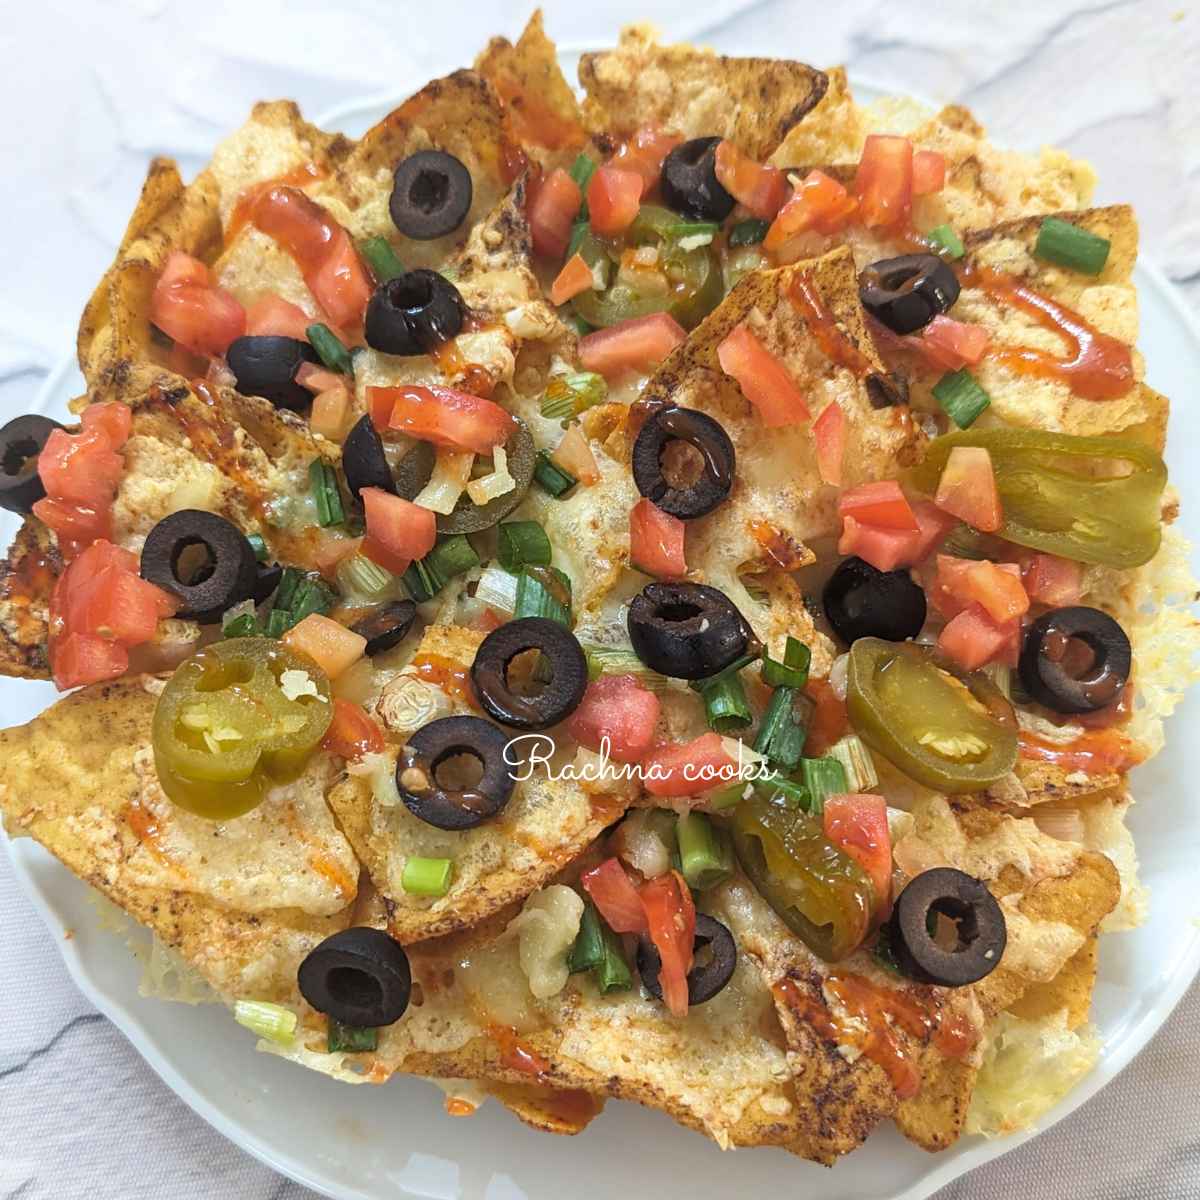 Loaded nachos with veggies and cheese served on a white plate.